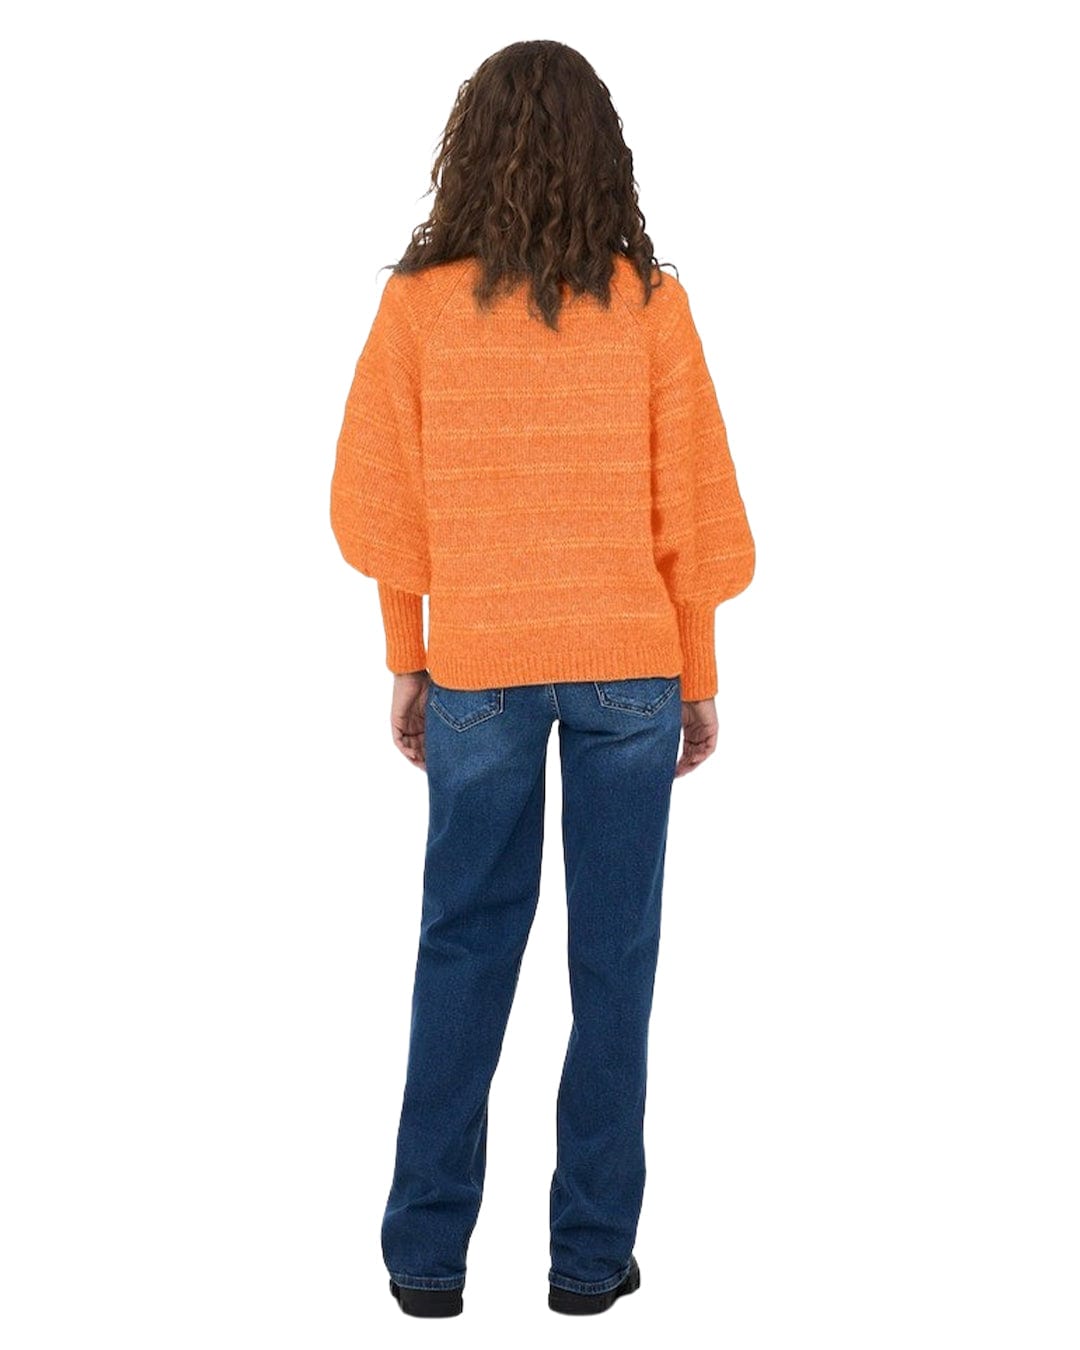 Only Jumpers Only Orange Balloon Sleeve Jumper